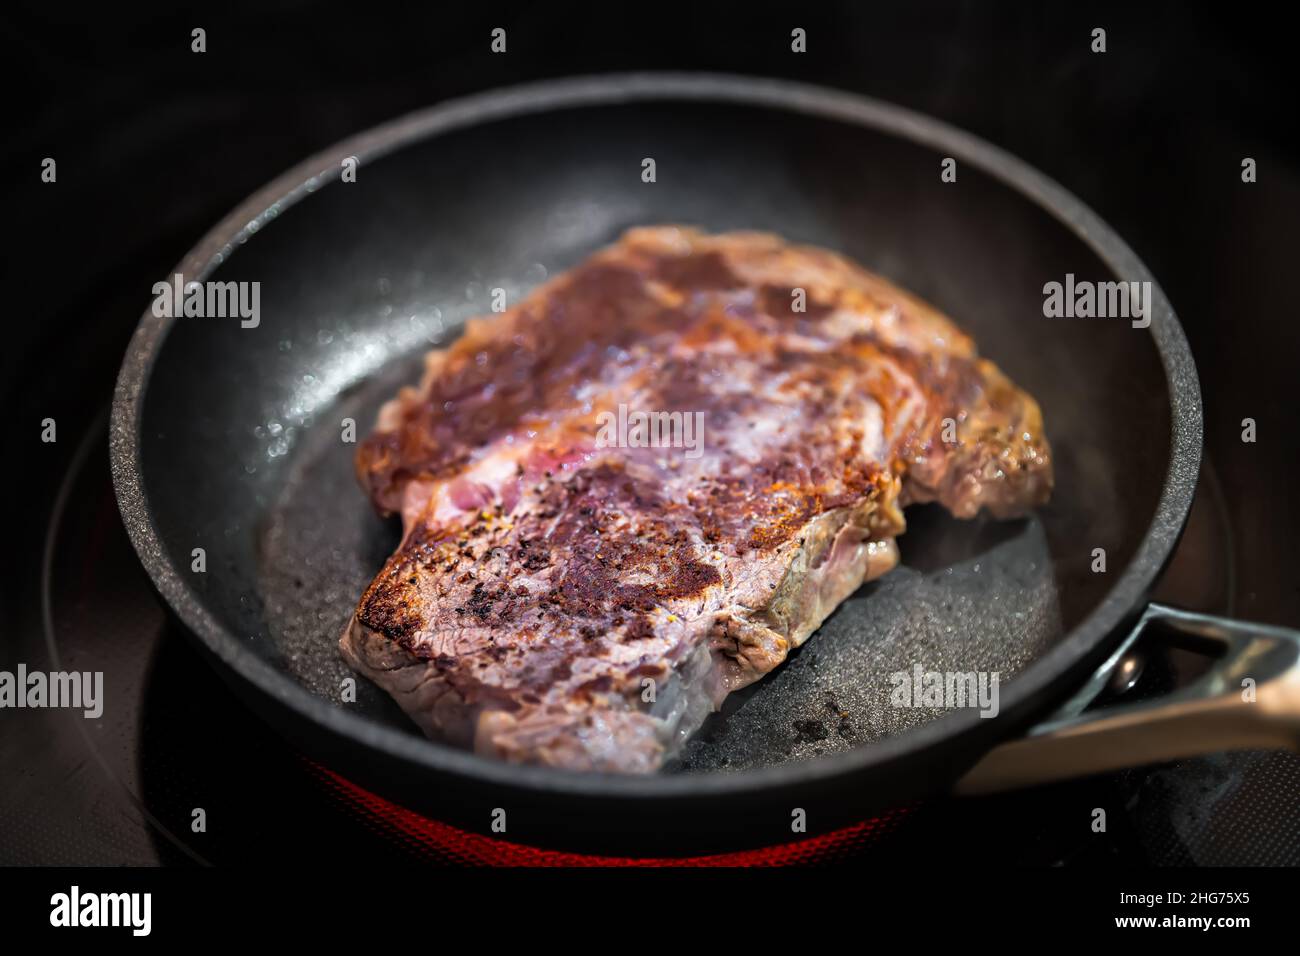 Closeup of brown charred crust on rare grass-fed ribeye rib eye meat steak cooking on non-stick frying pan grill with pepper salt seasoning Stock Photo